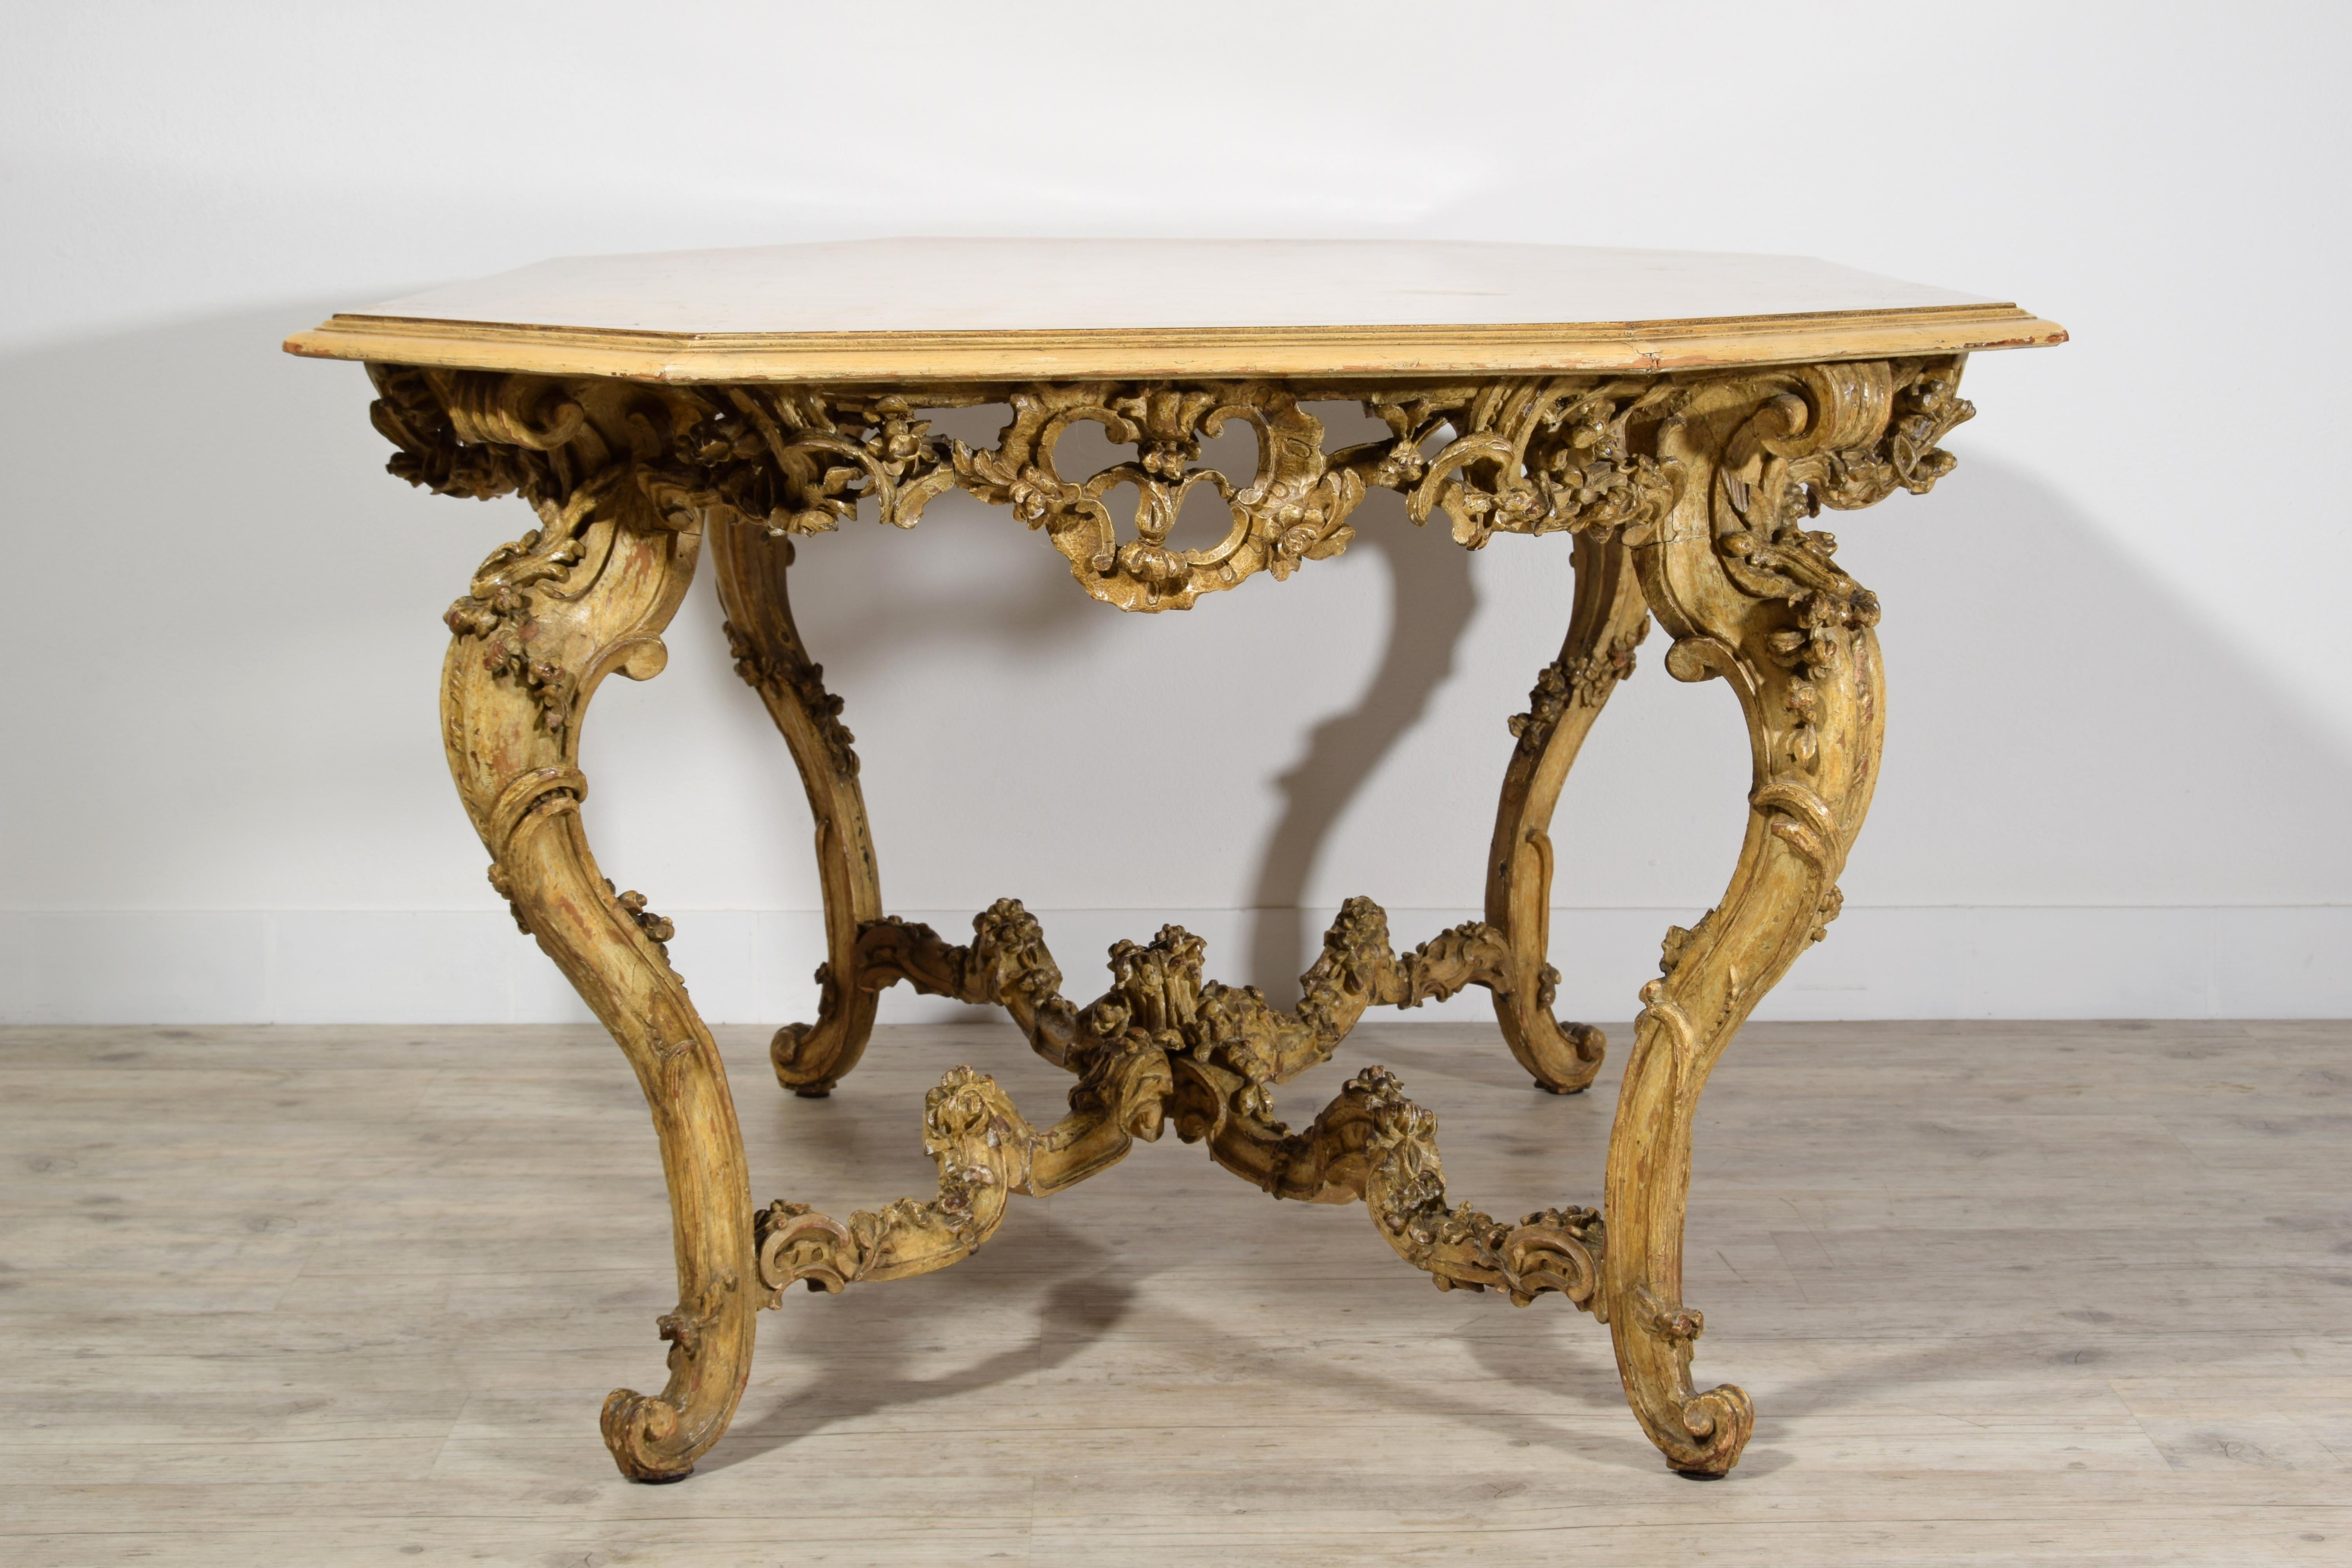 Italian Baroque Carved Gilt and Lacquered Wood Center Table, 18th Century For Sale 15